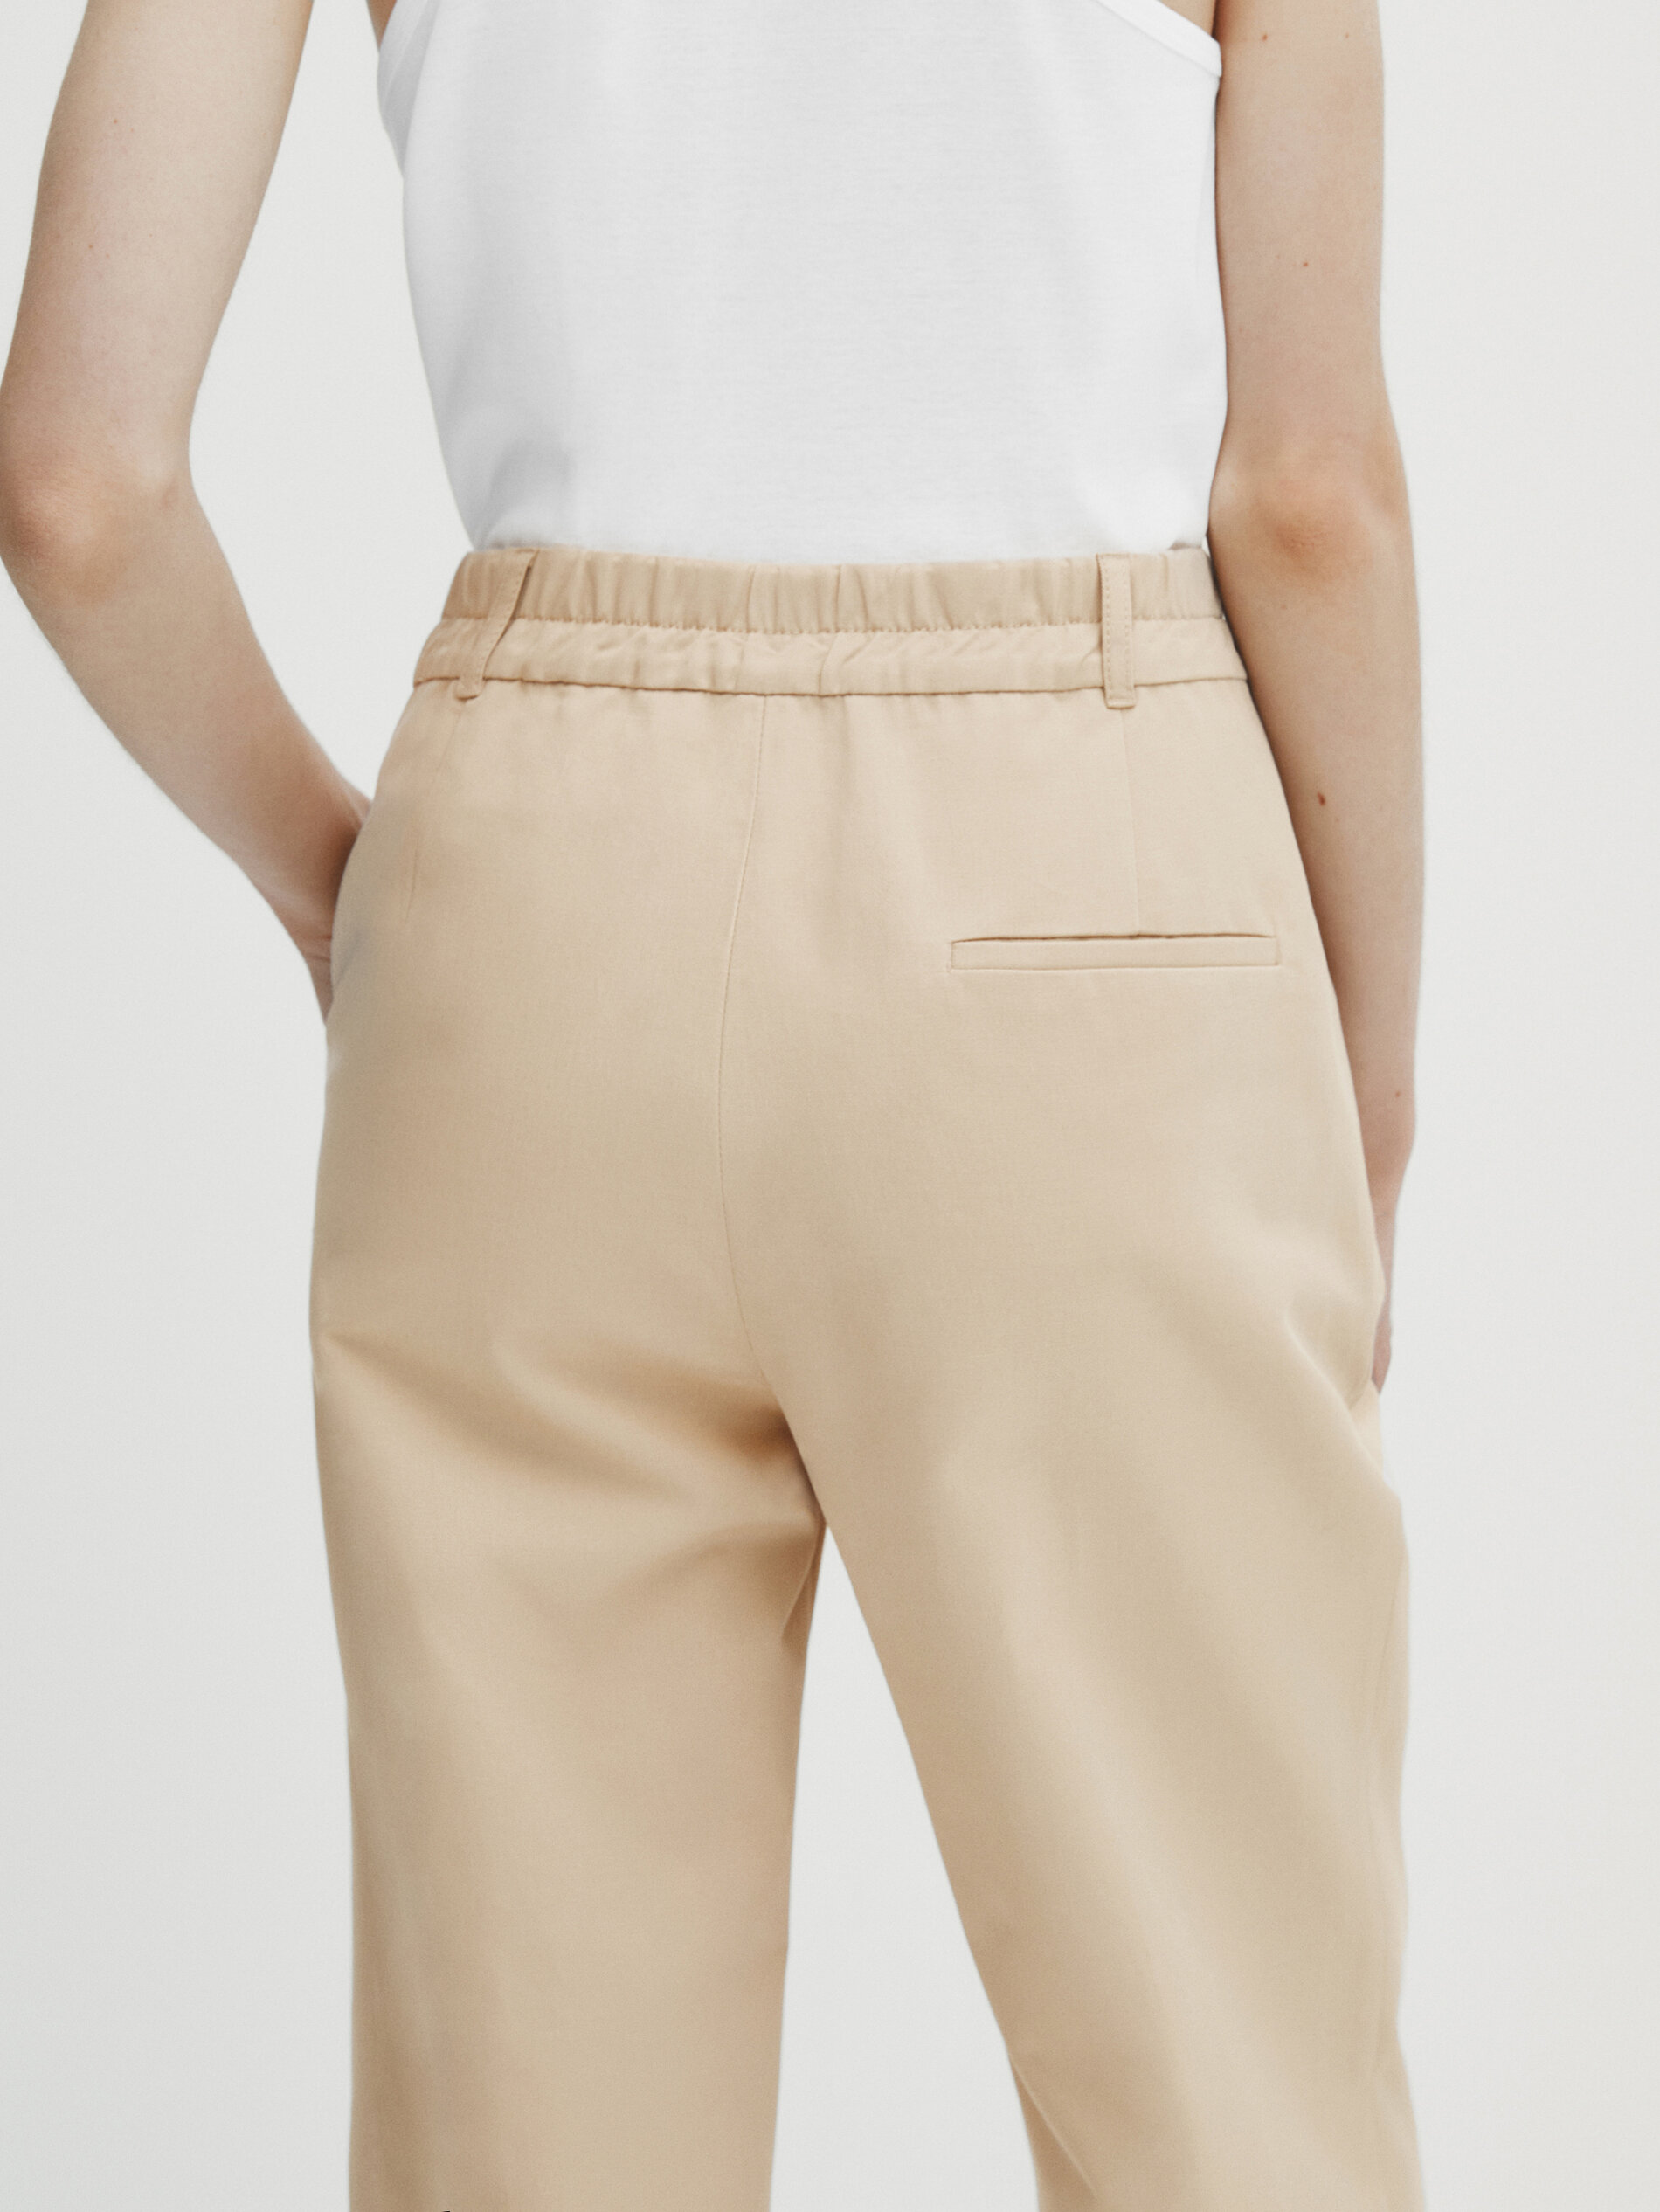 RUSTIC TROUSERS WITH ELASTICATED WAISTBAND  Sand  ZARA India